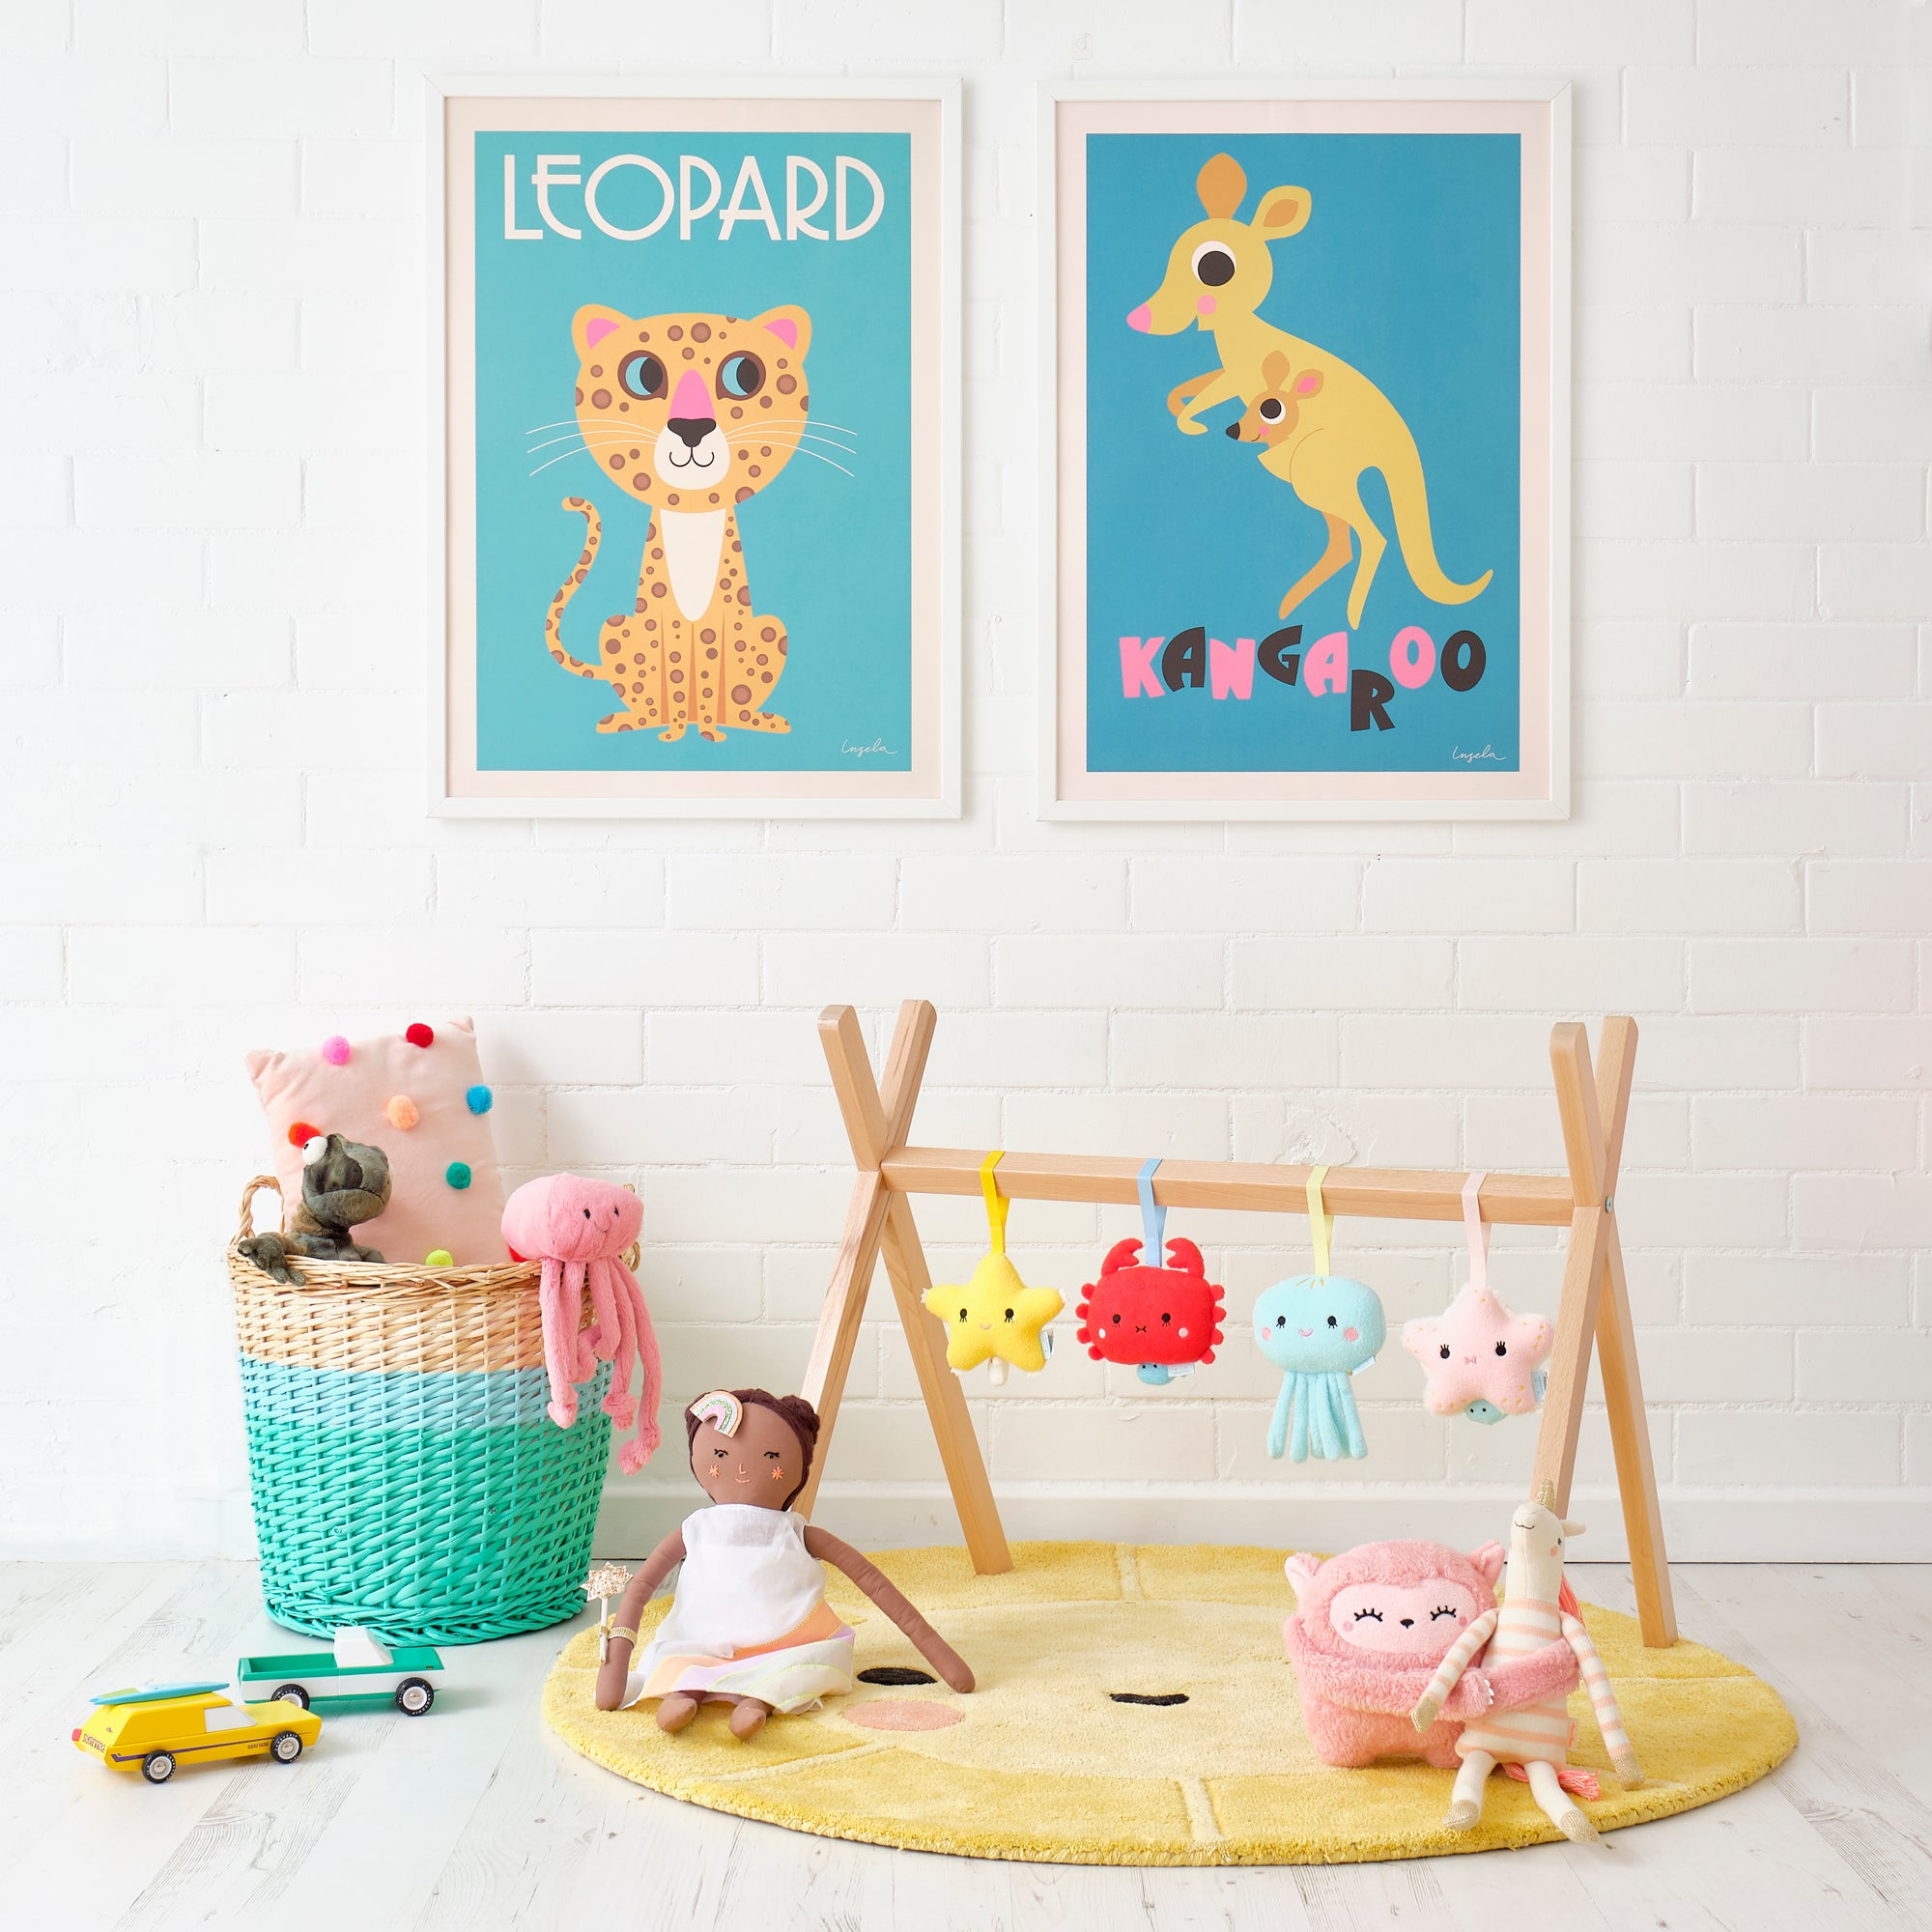 Play Gym, Posters and Toys, styled by Bobby Rabbit.